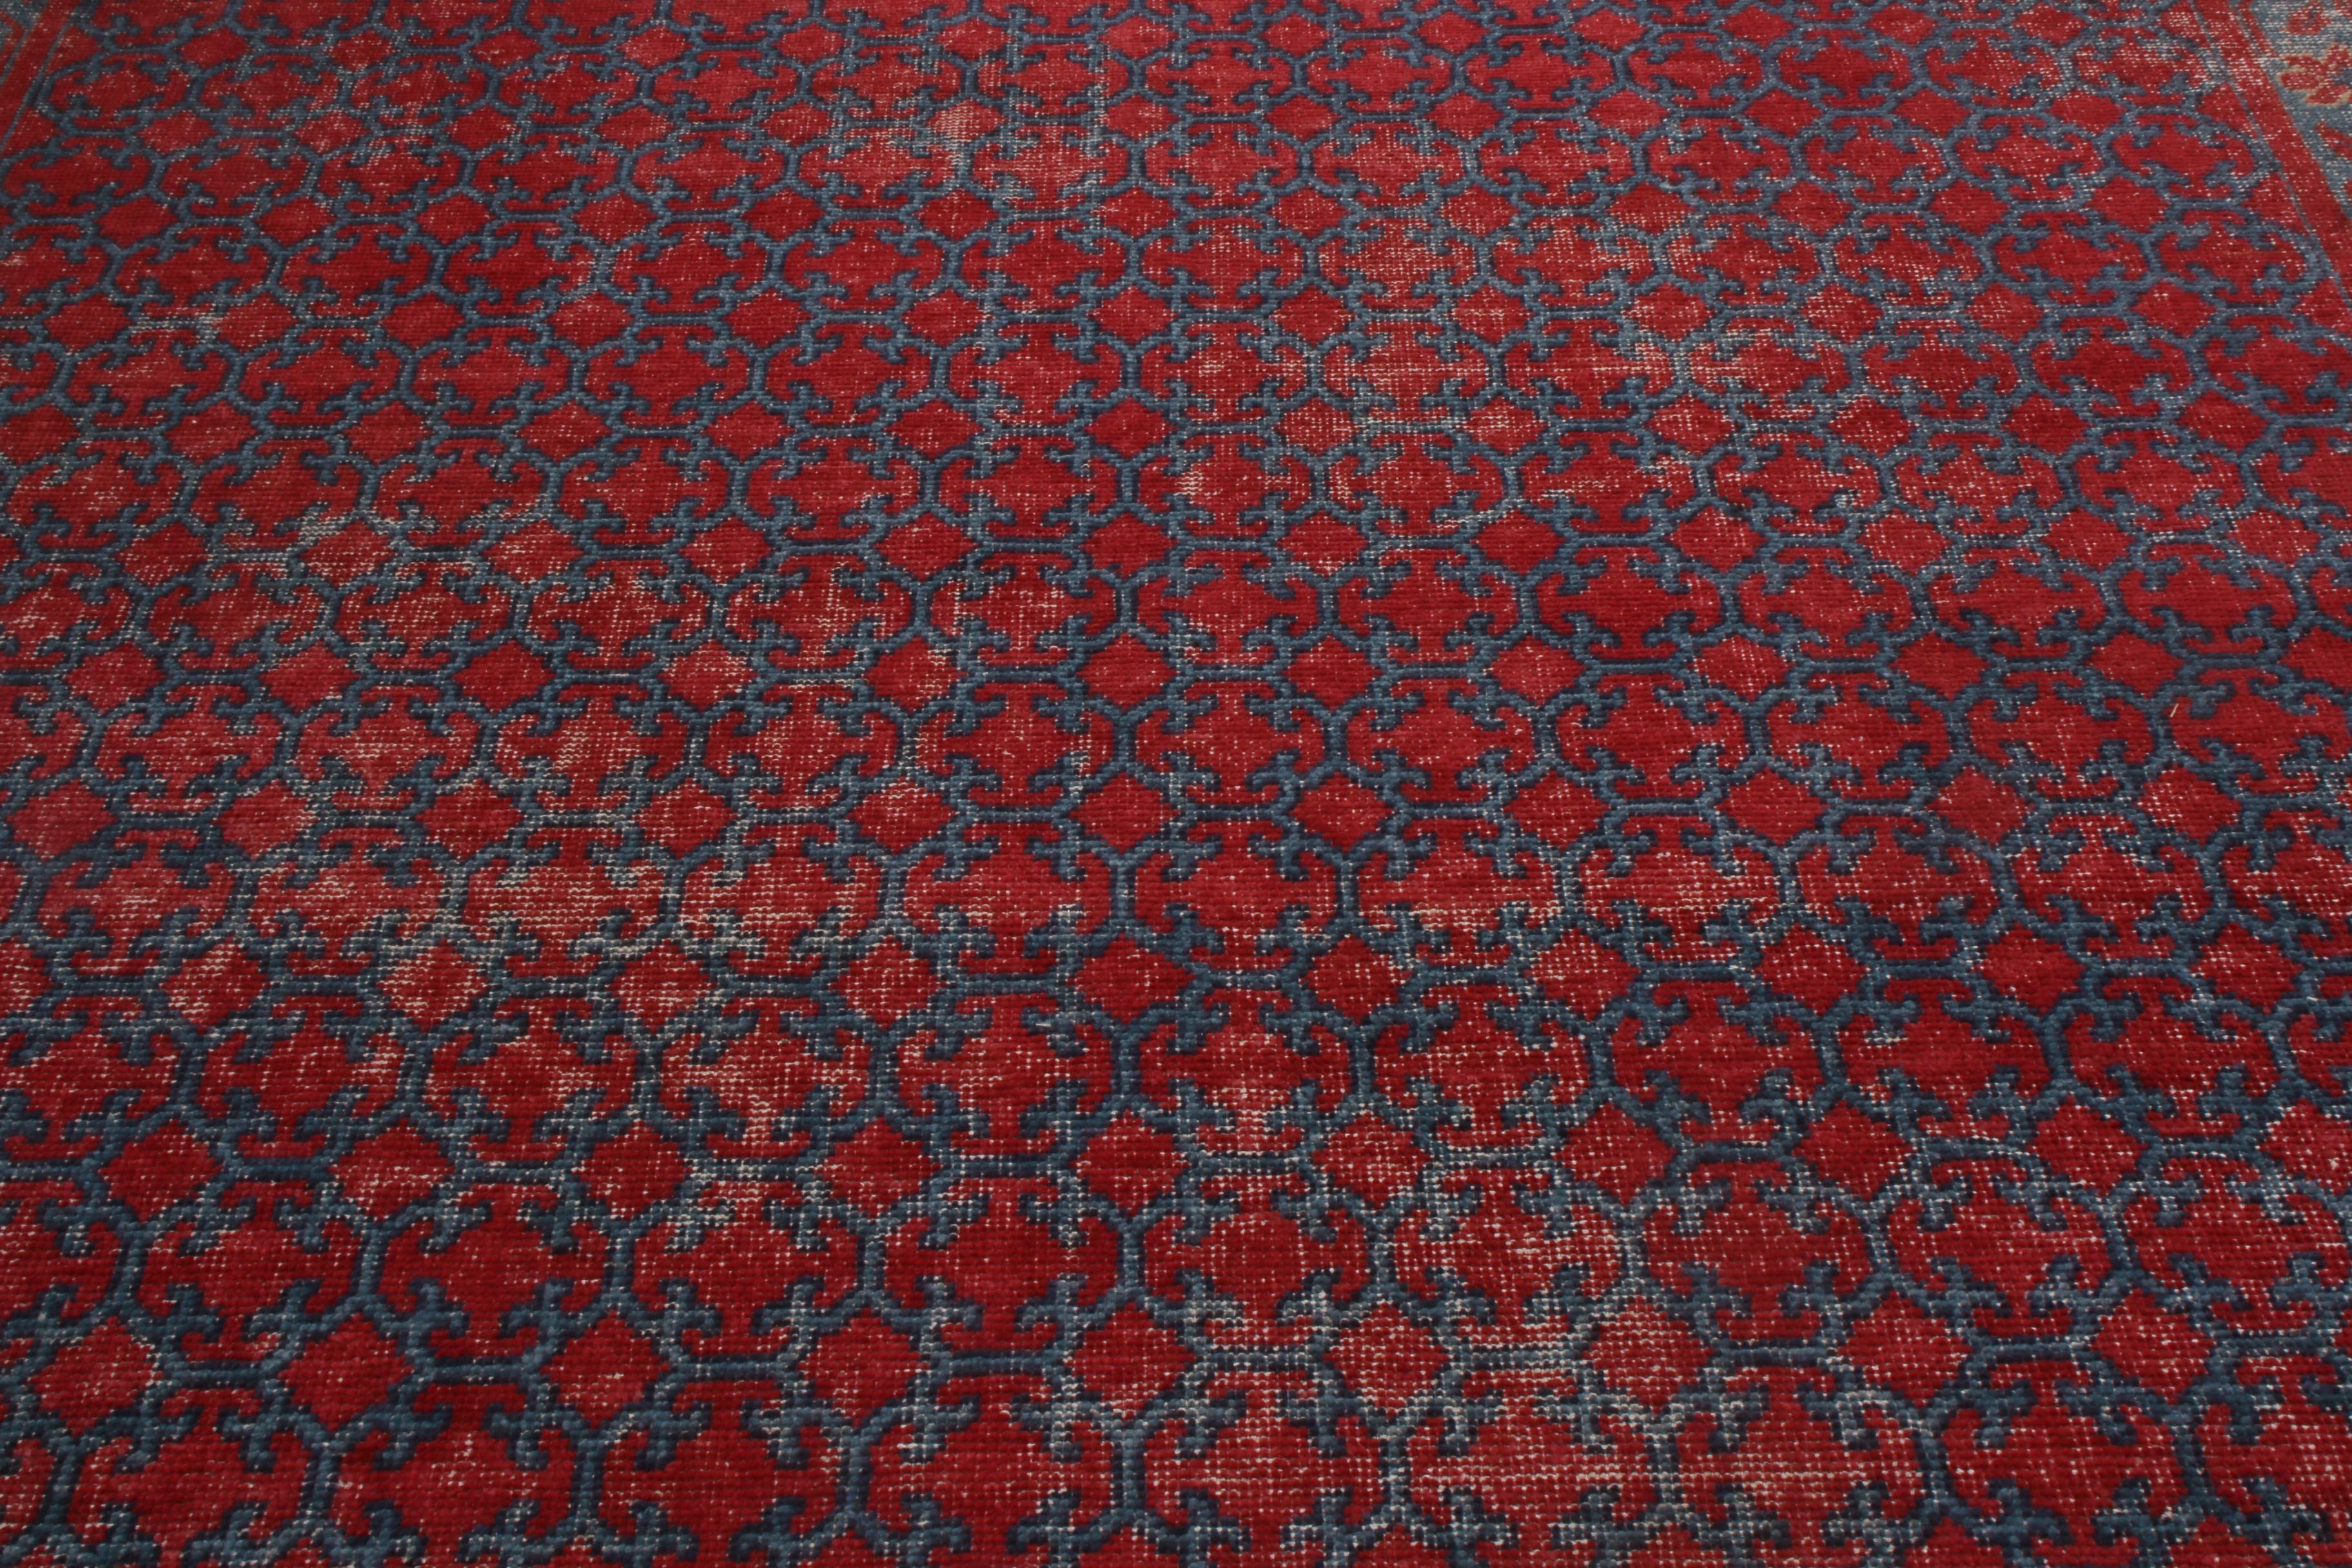 Indian Khotan Velvet Red and Blue Wool Rug from the Homage Collection by Rug & Kilim